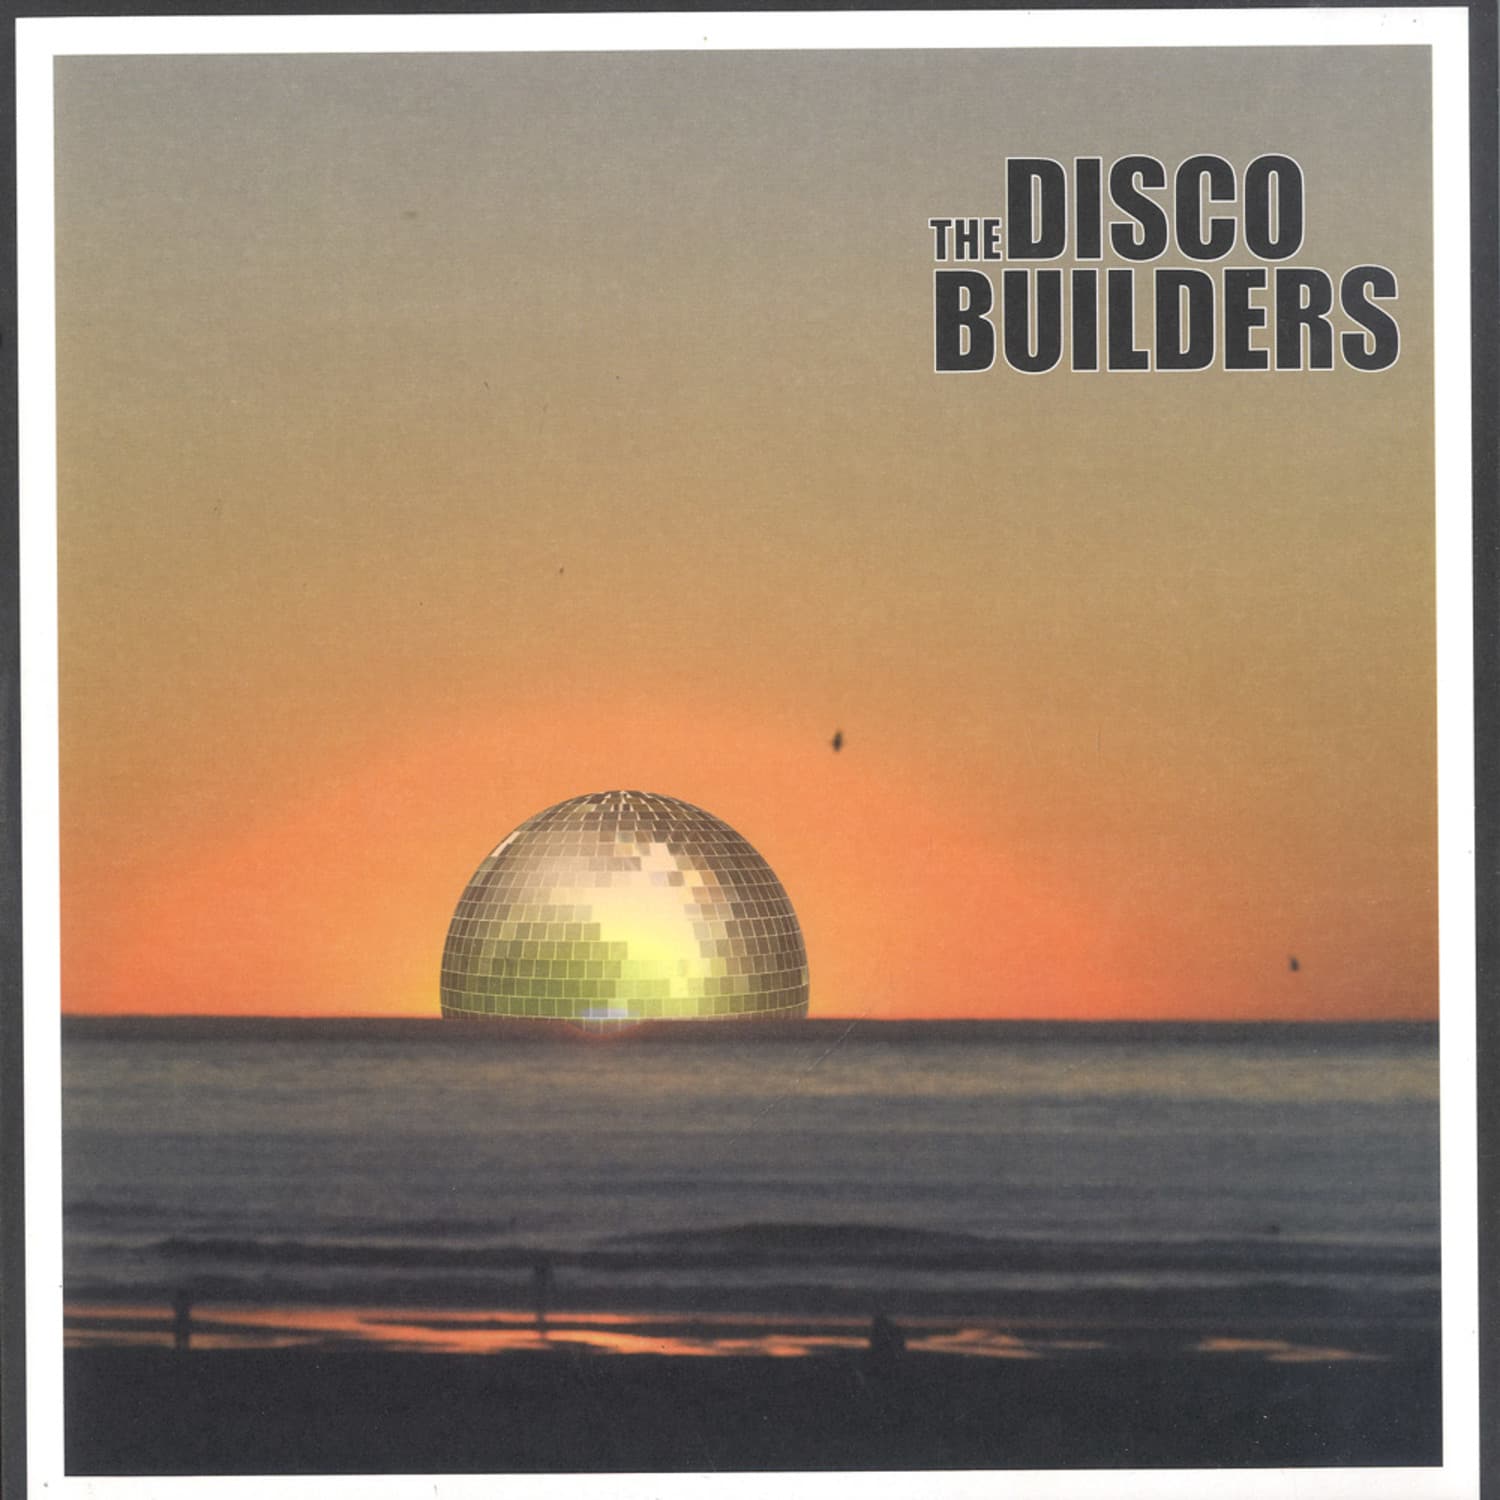 Tal M. Klein presents The Disco Builders - DONT LOOK BACK EP